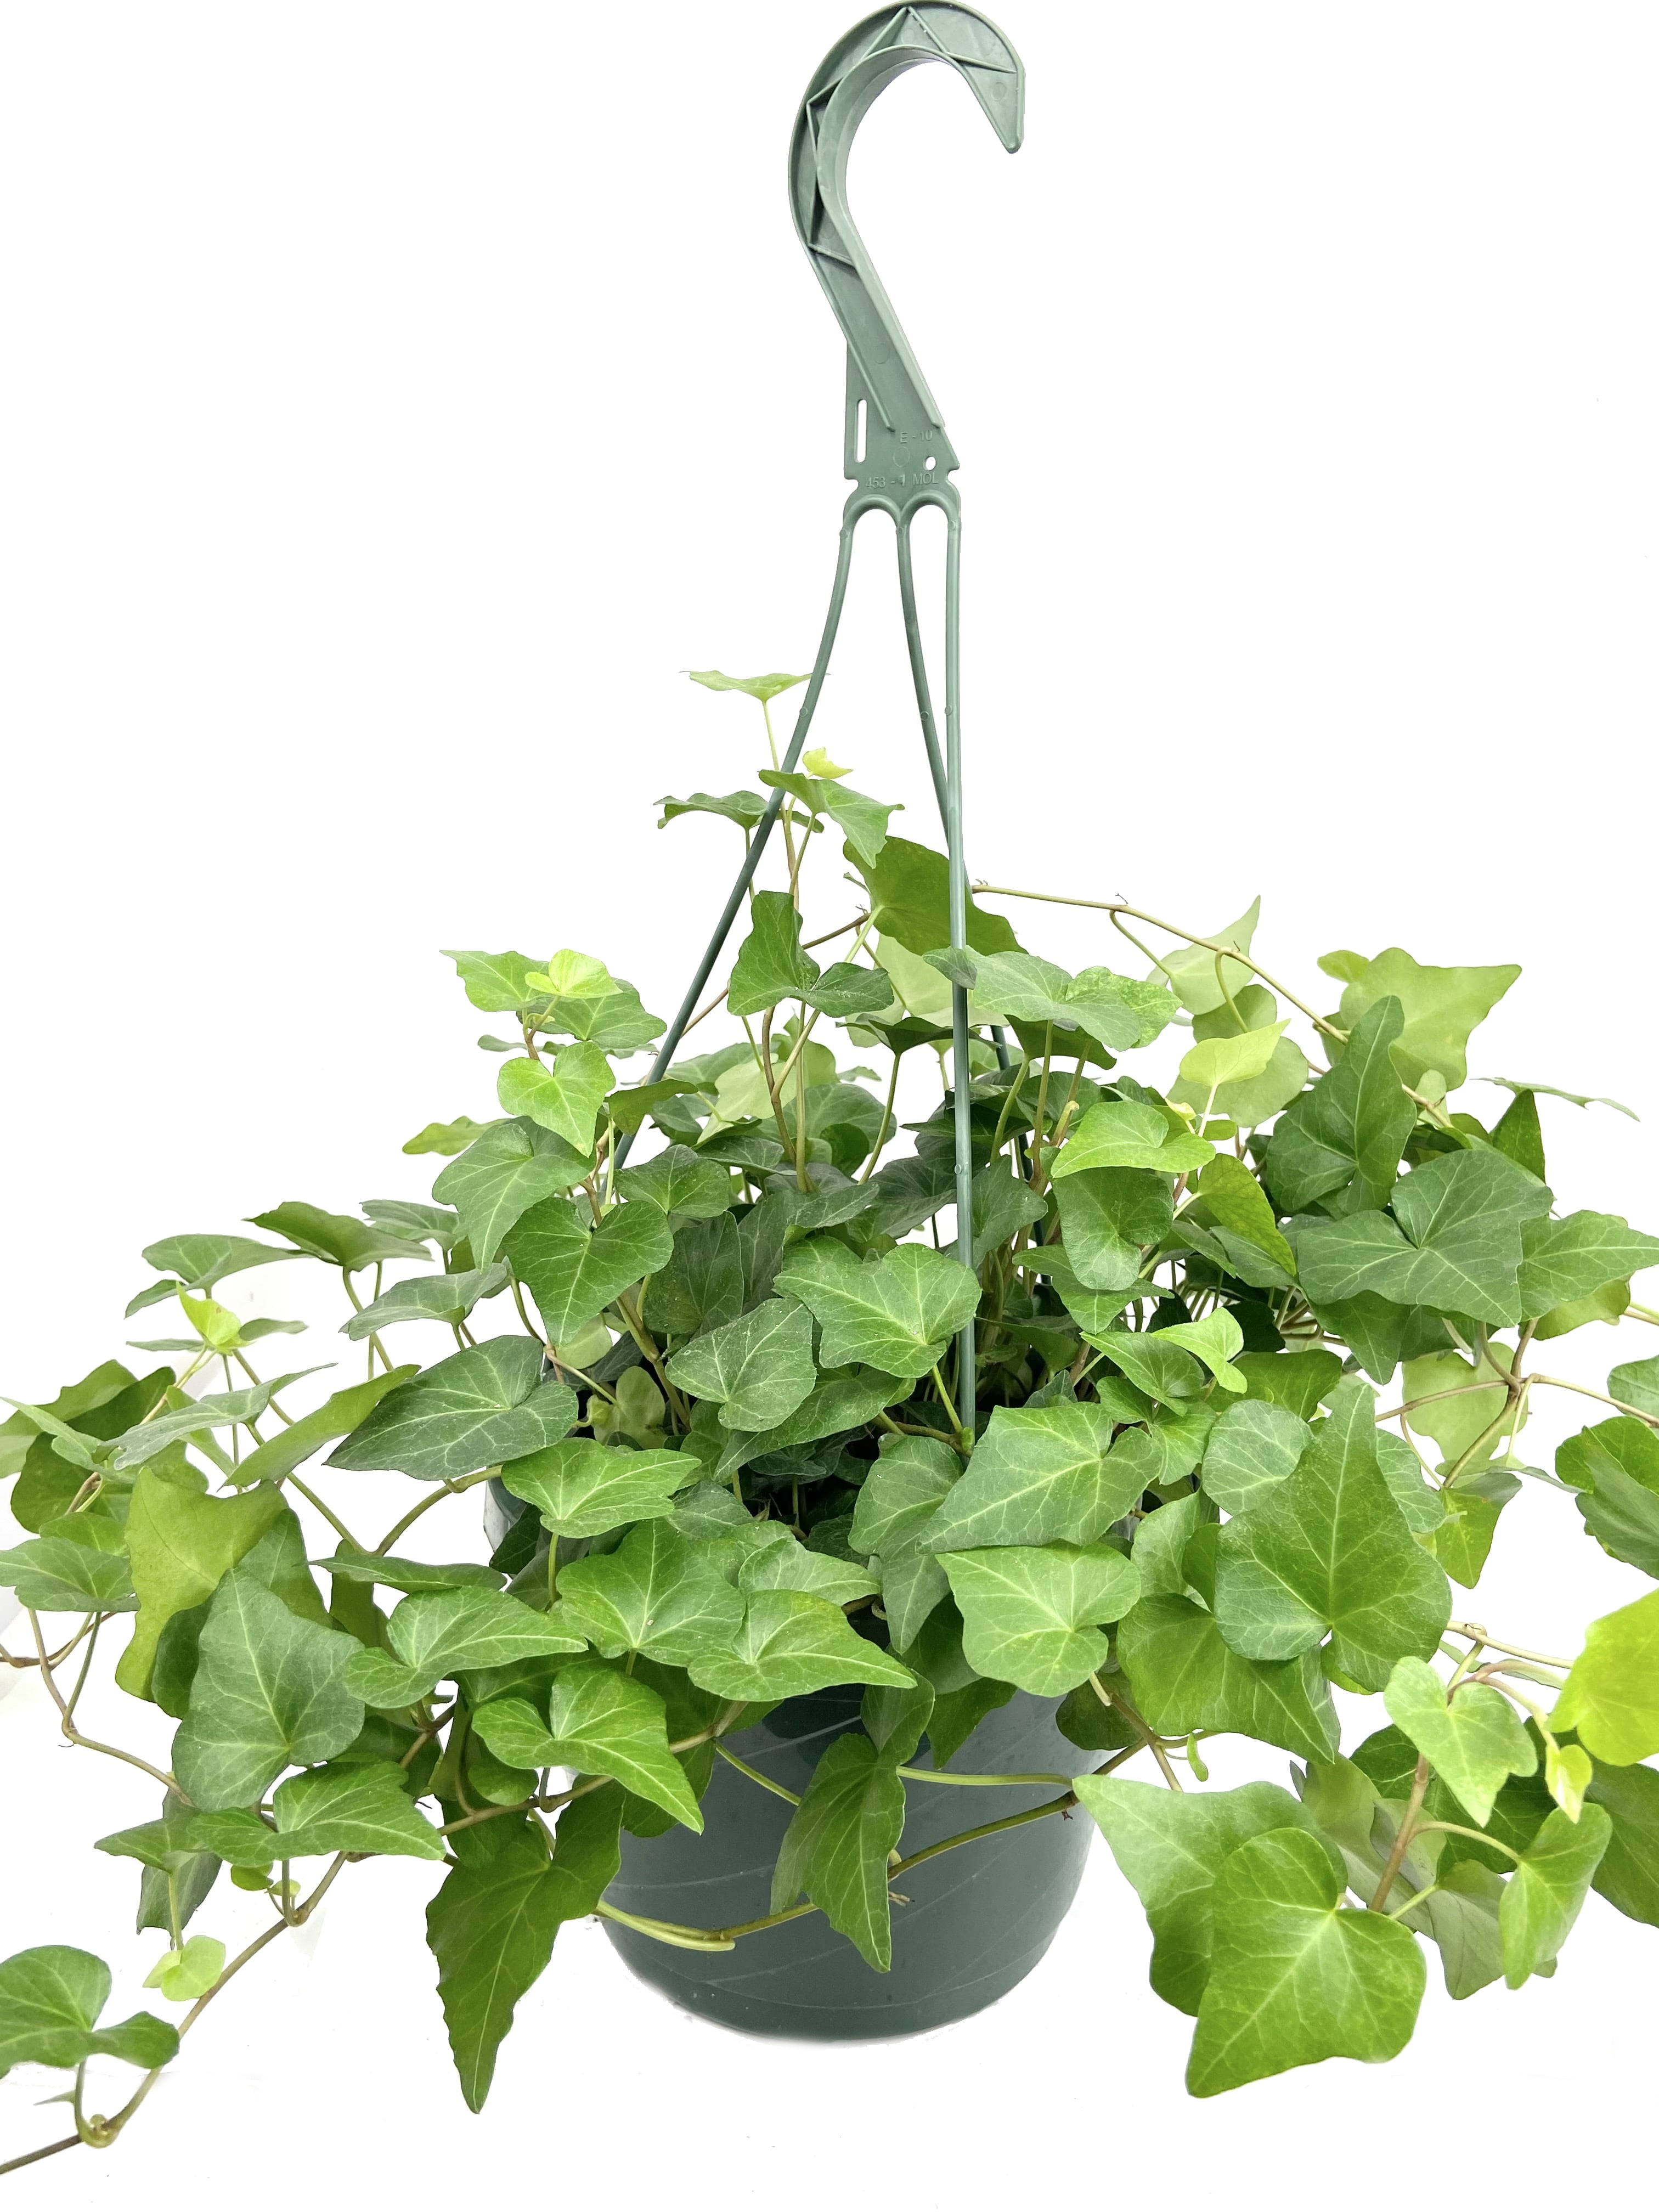 Green English Ivy Hanging Basket - Live in an 8 inch Pot - Hedera Helix Beautiful Easy Care Indoor Air Purifying Houseplant Vine - Walmart.com